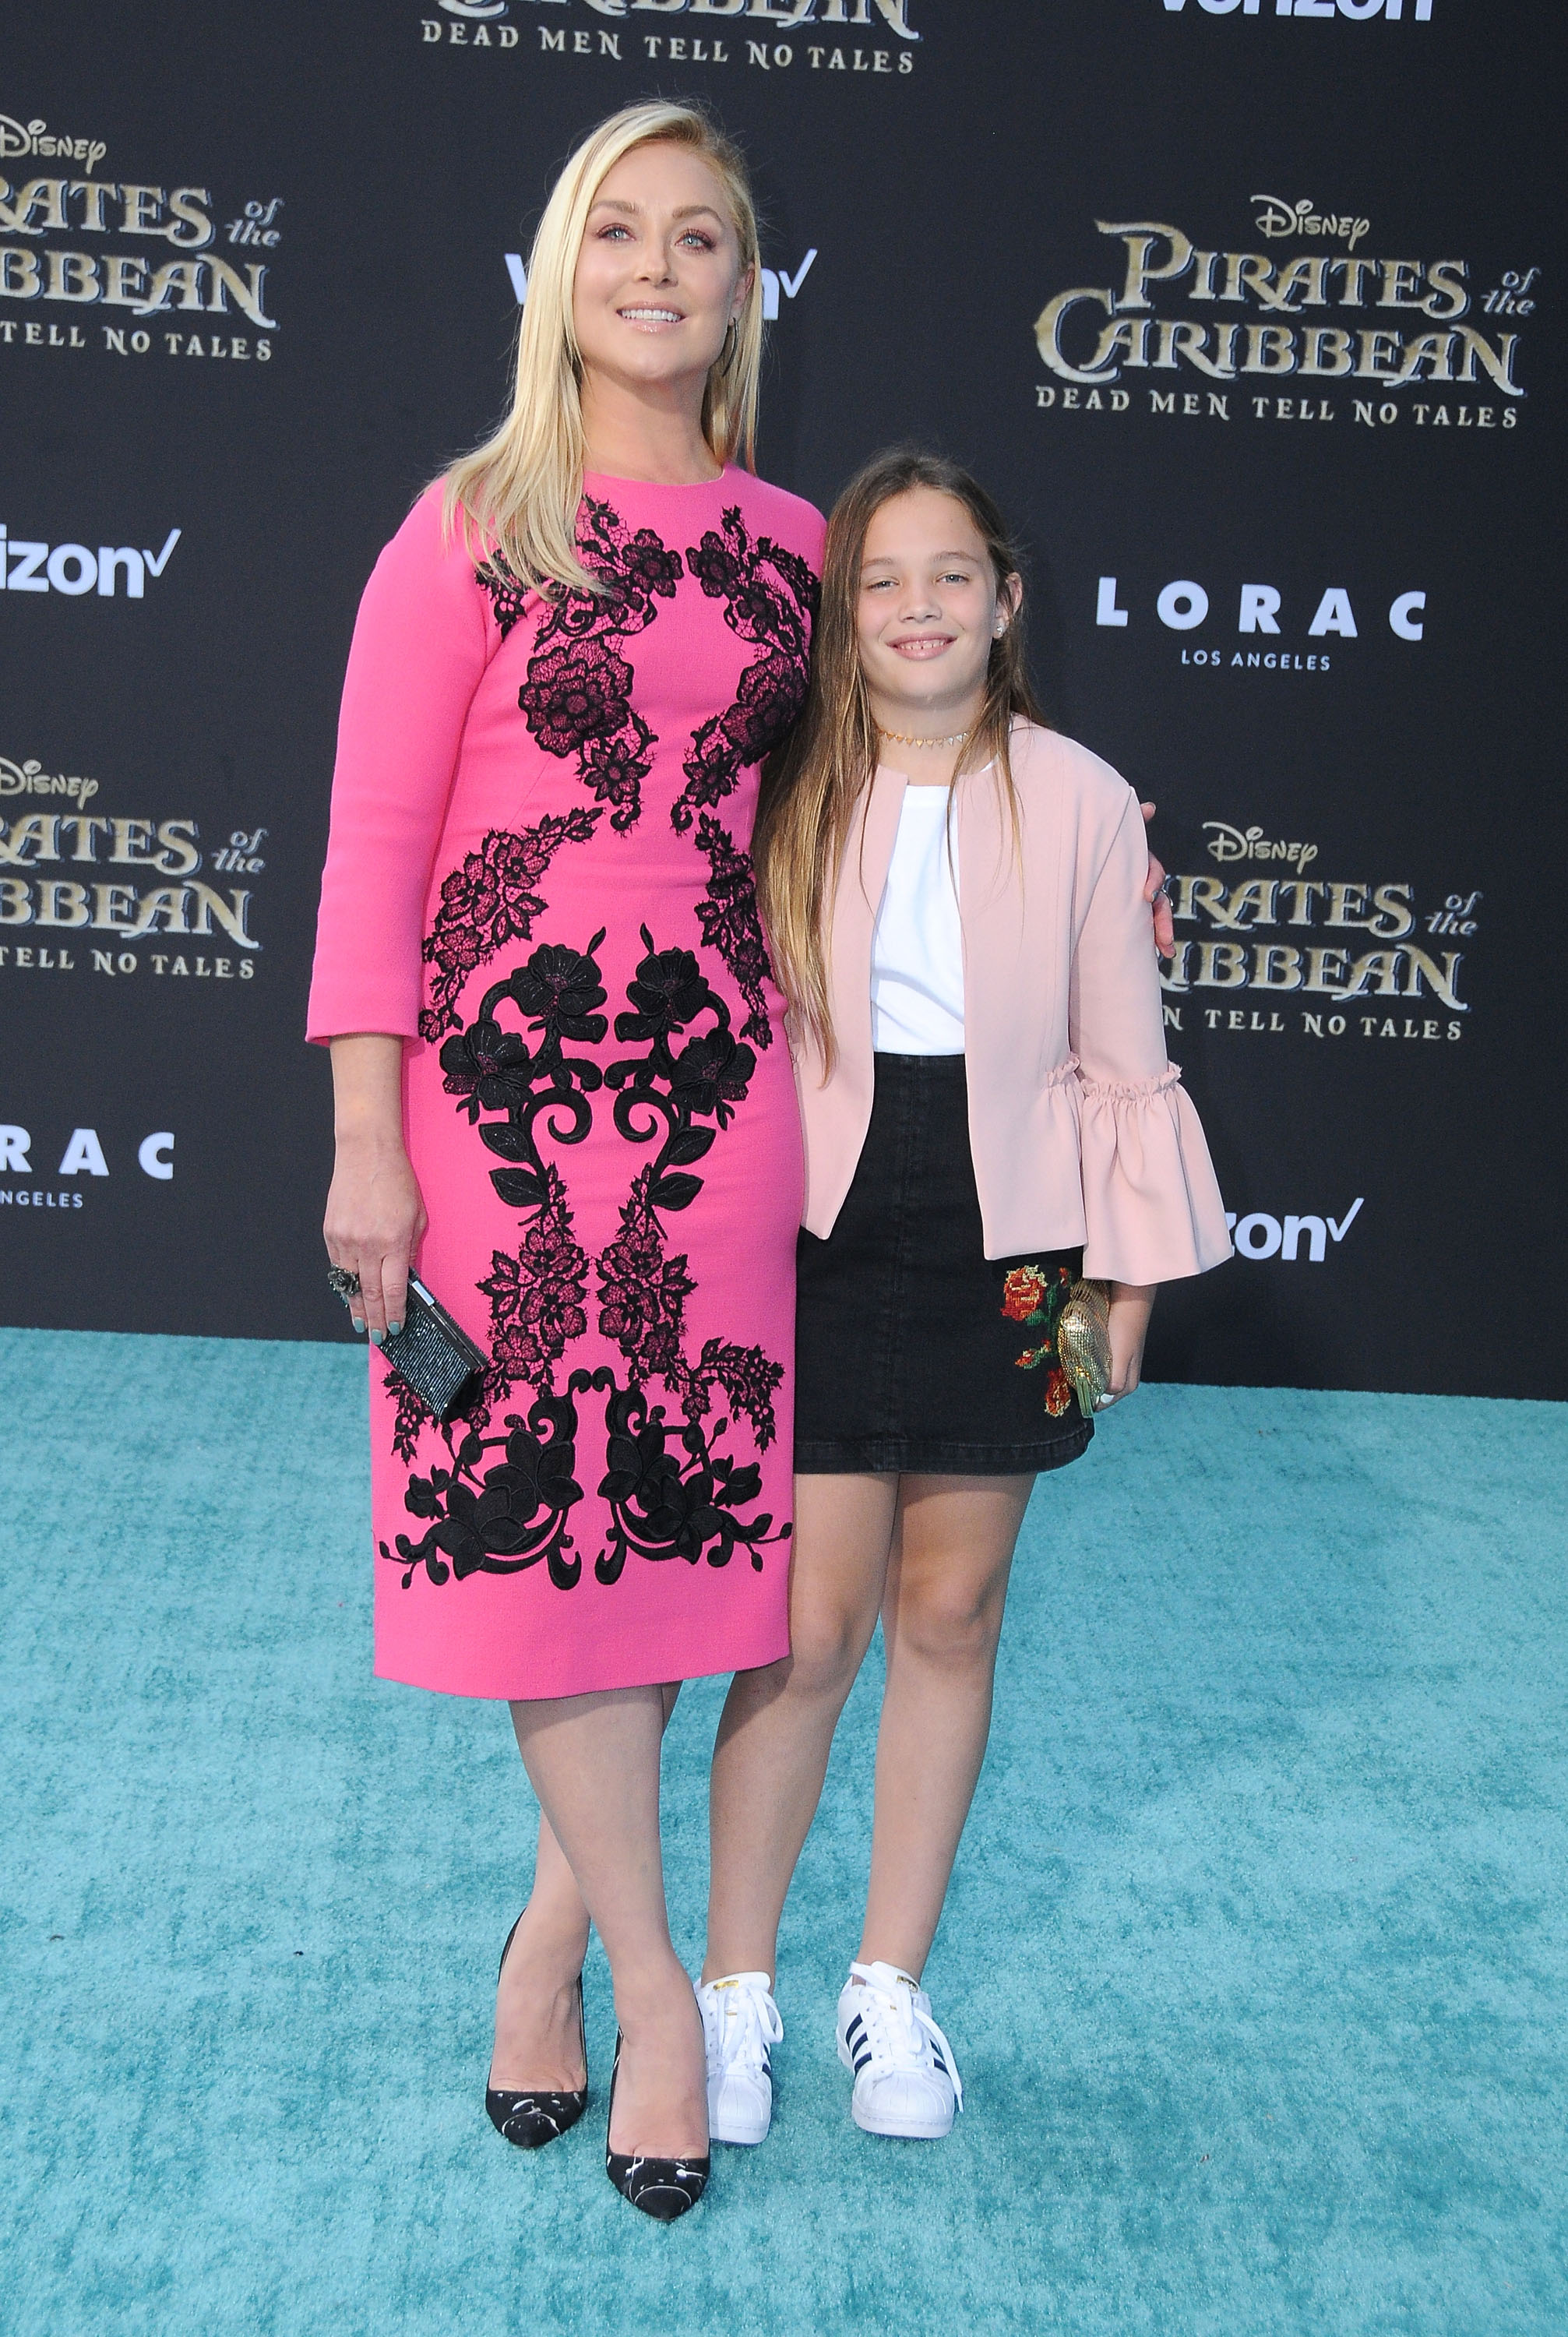 Actress Elisabeth Rohm and daughter Easton attend the premiere of Disney's 'Pirates Of The Caribbean: Dead Men Tell No Tales' at Dolby Theatre on May 18, 2017 in Hollywood, California. | Source: Getty Images